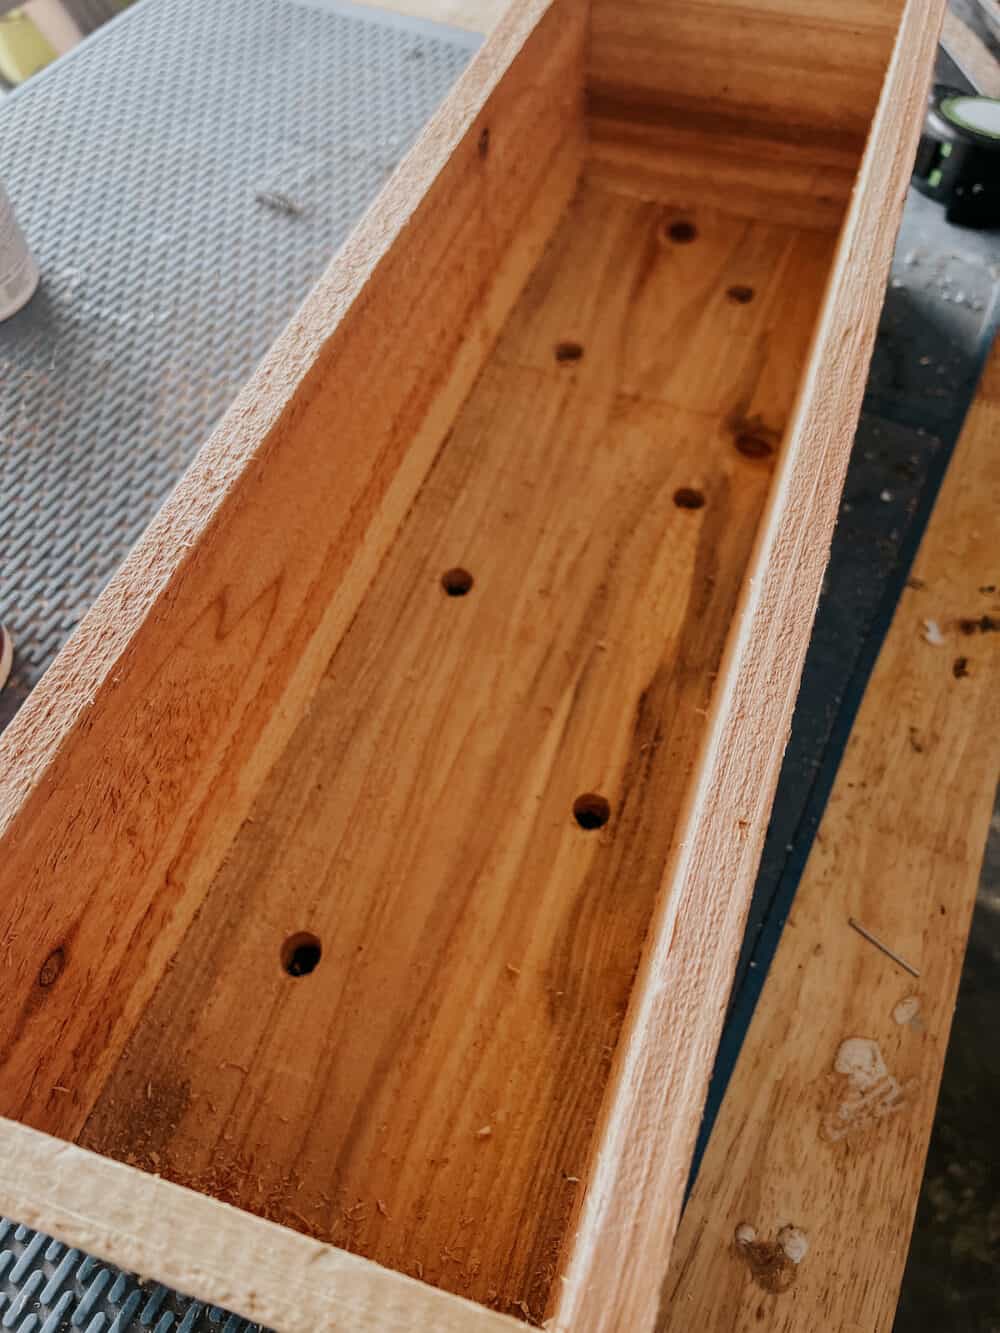 Completed window box with drainage holes drilled in it 